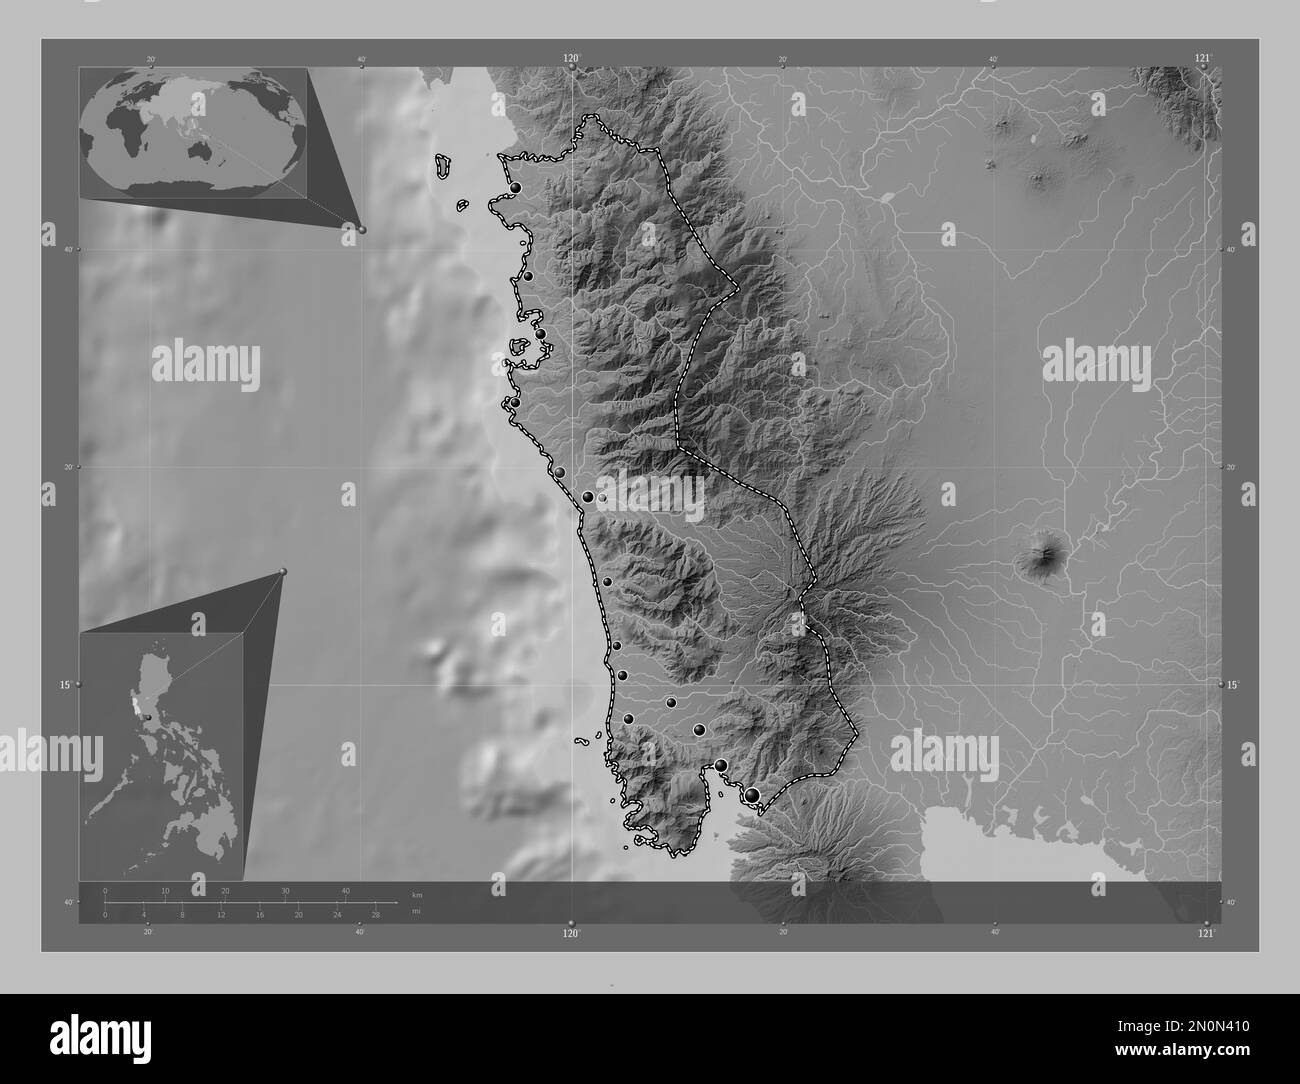 Zambales, province of Philippines. Grayscale elevation map with lakes and rivers. Locations of major cities of the region. Corner auxiliary location m Stock Photo